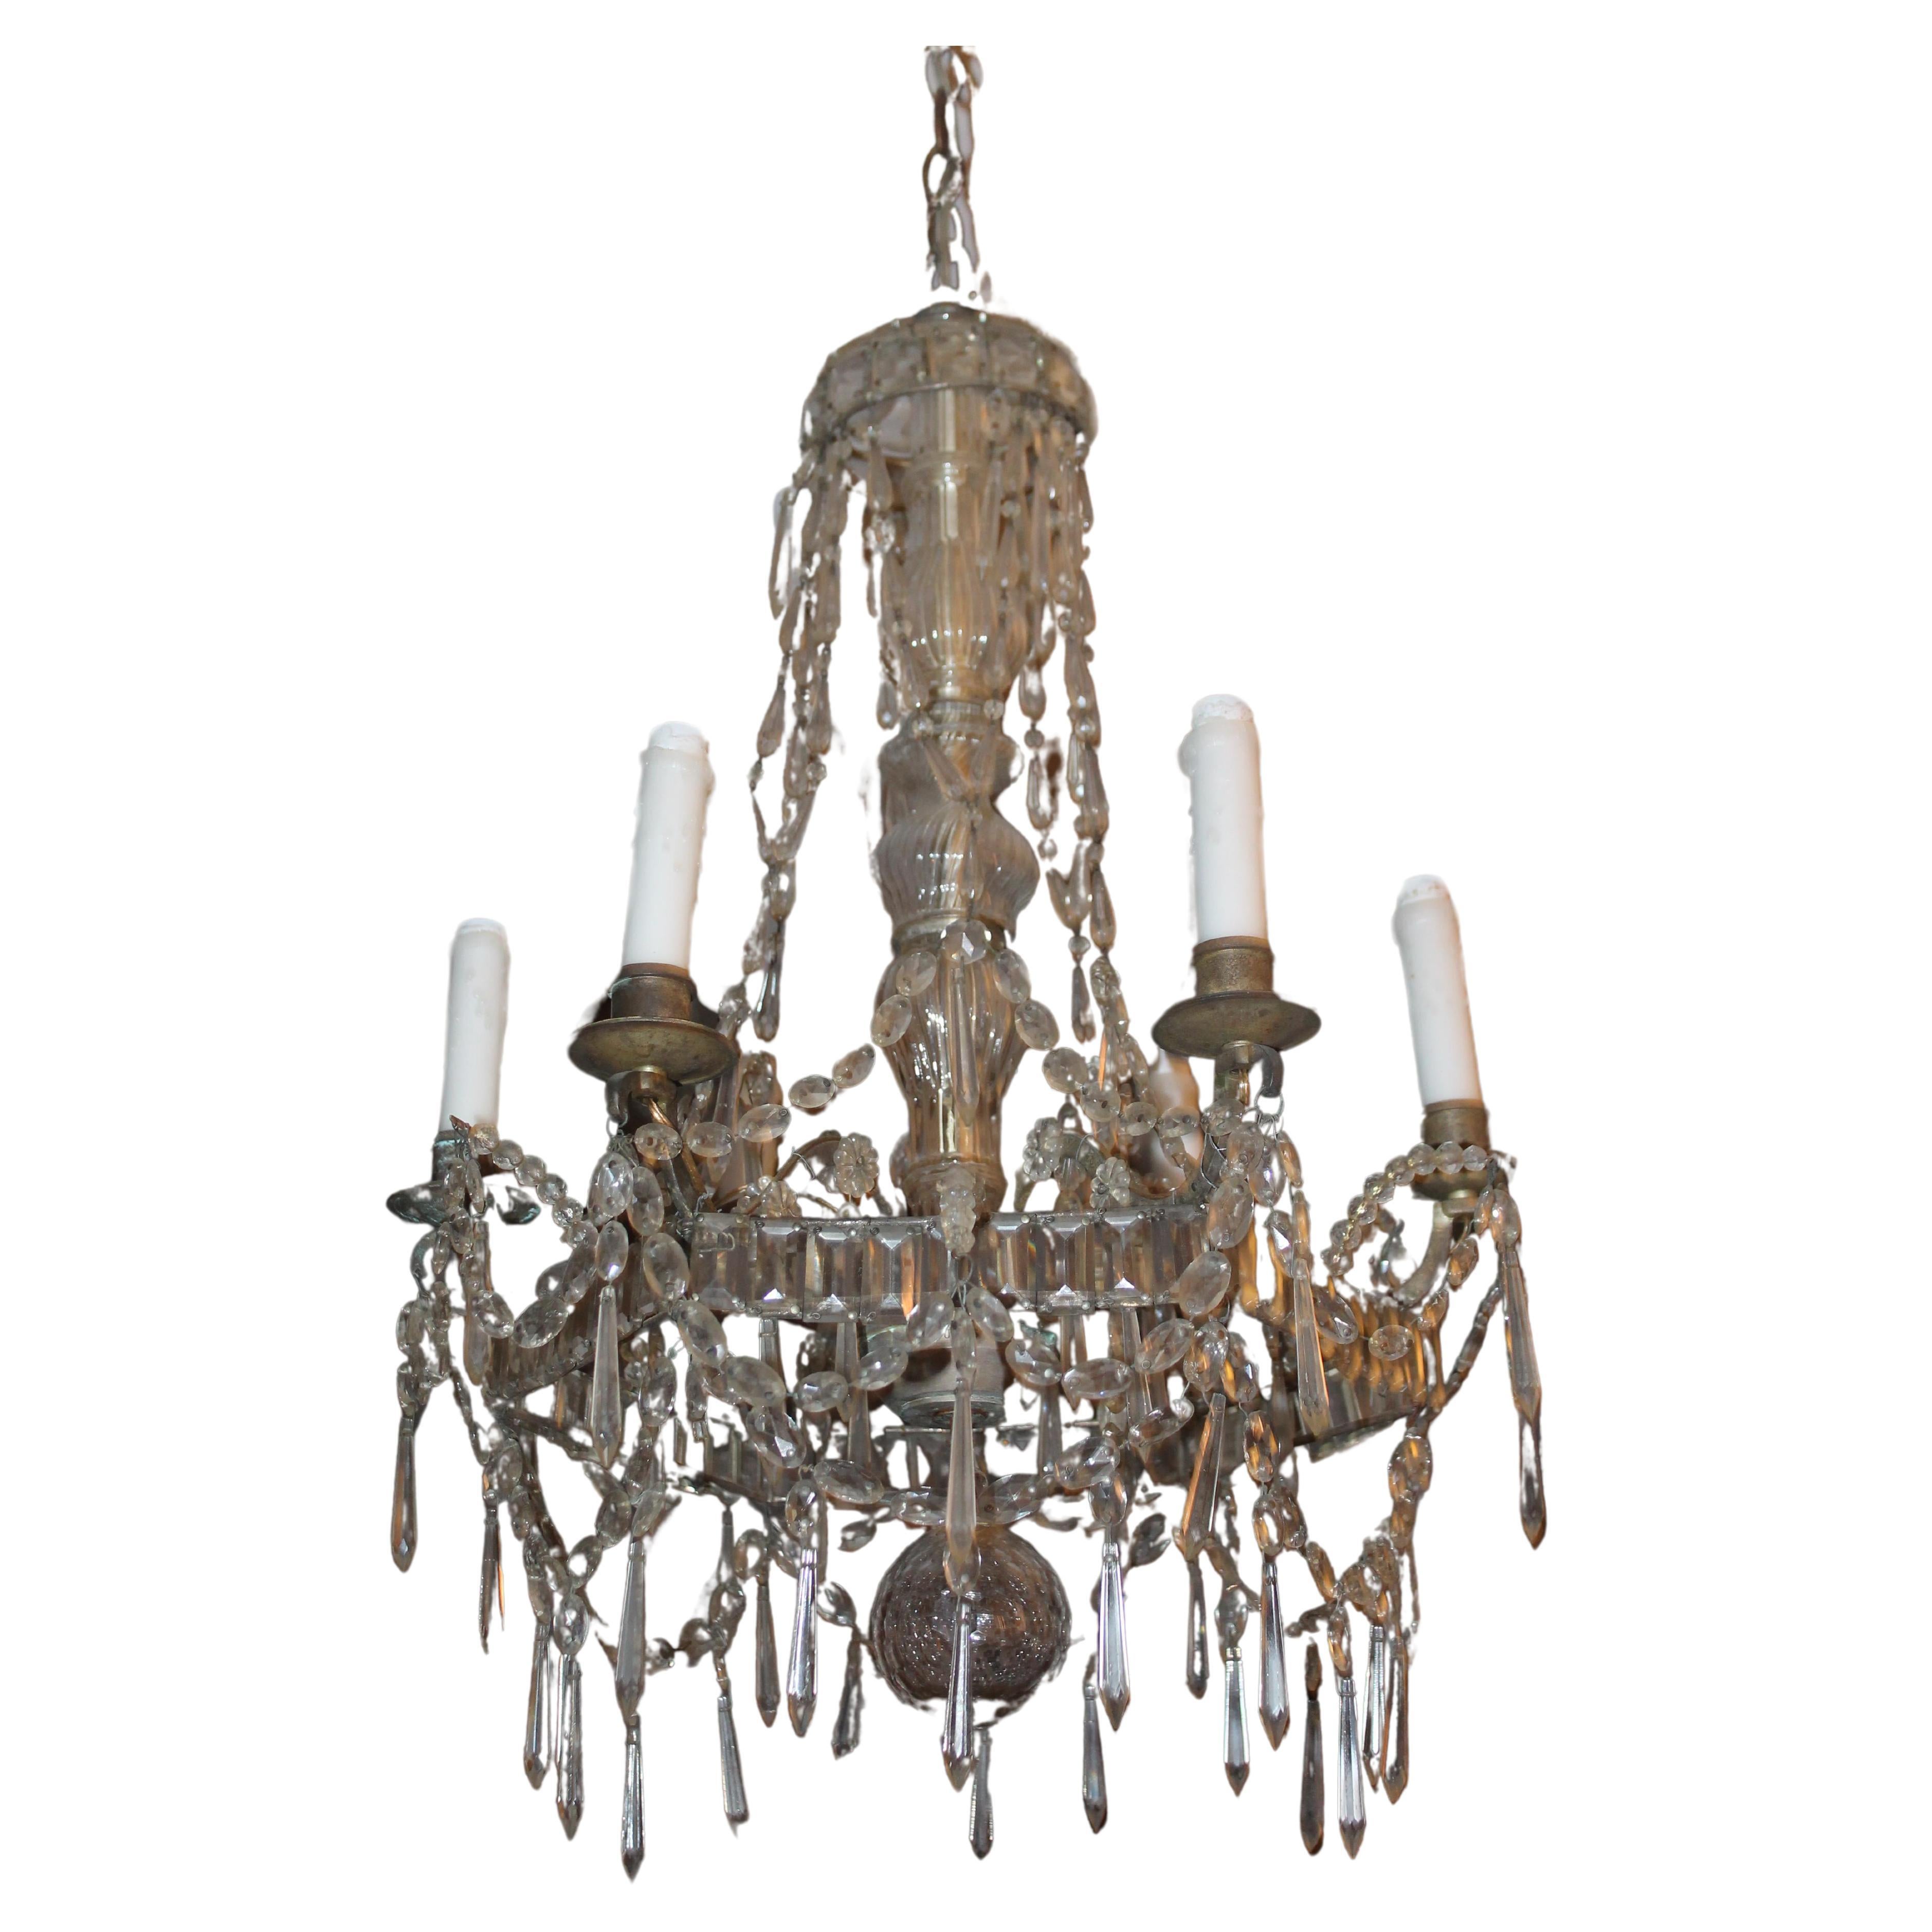 1910 French Neoclassic Cut Crystal Steel Framed Chandelier Signed Maison Bagues For Sale